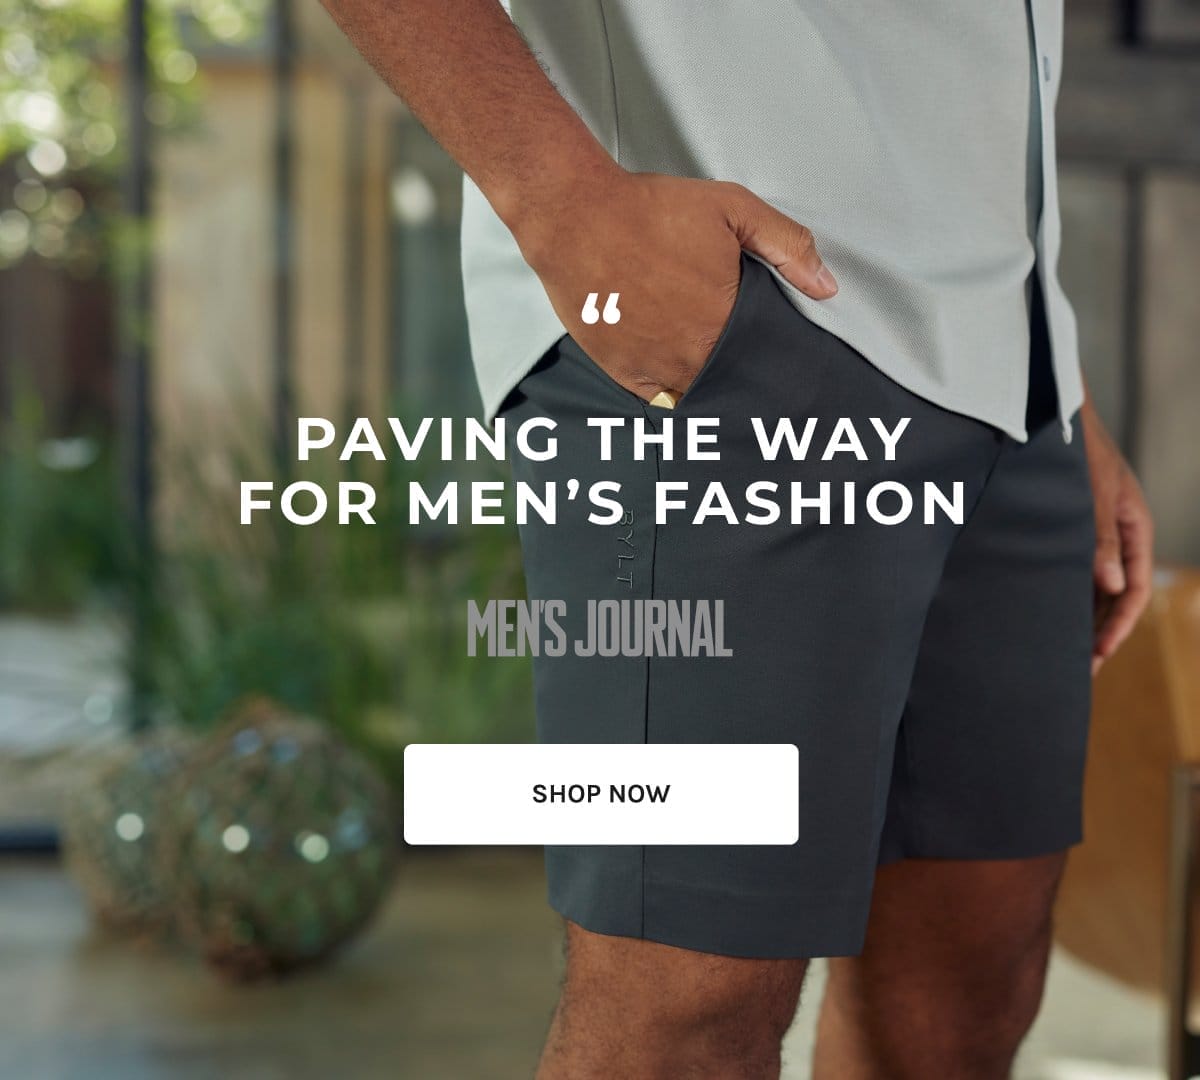 Paving the way for men's fashion.